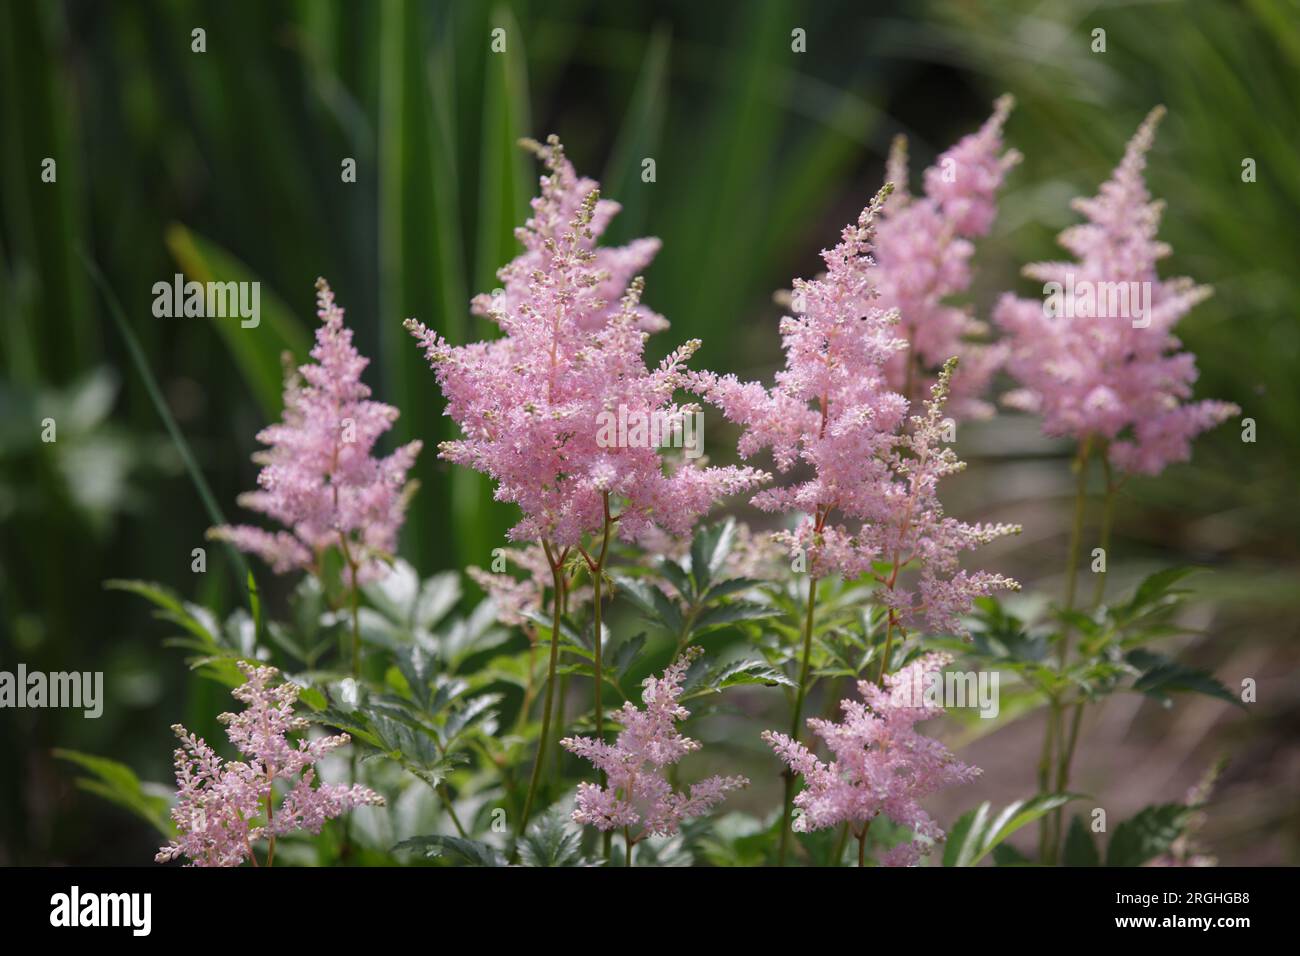 Astilbe or false goat's beard and false spirea. Pink flower astilbe  blooms in summer in the garden. Delicate fluffy inflorescences, selective focus Stock Photo